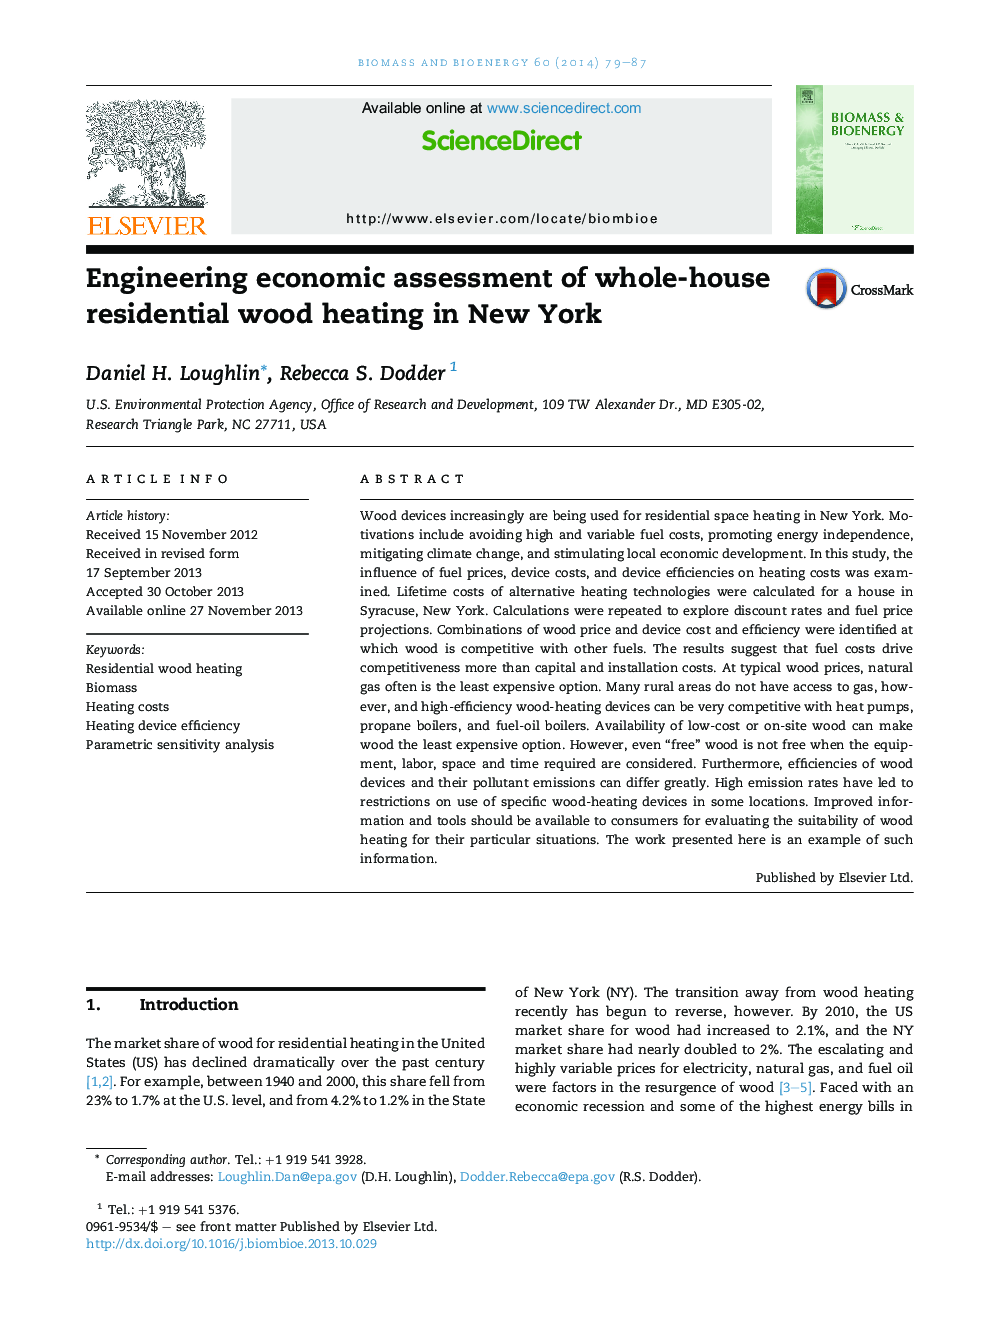 Engineering economic assessment of whole-house residential wood heating in New York